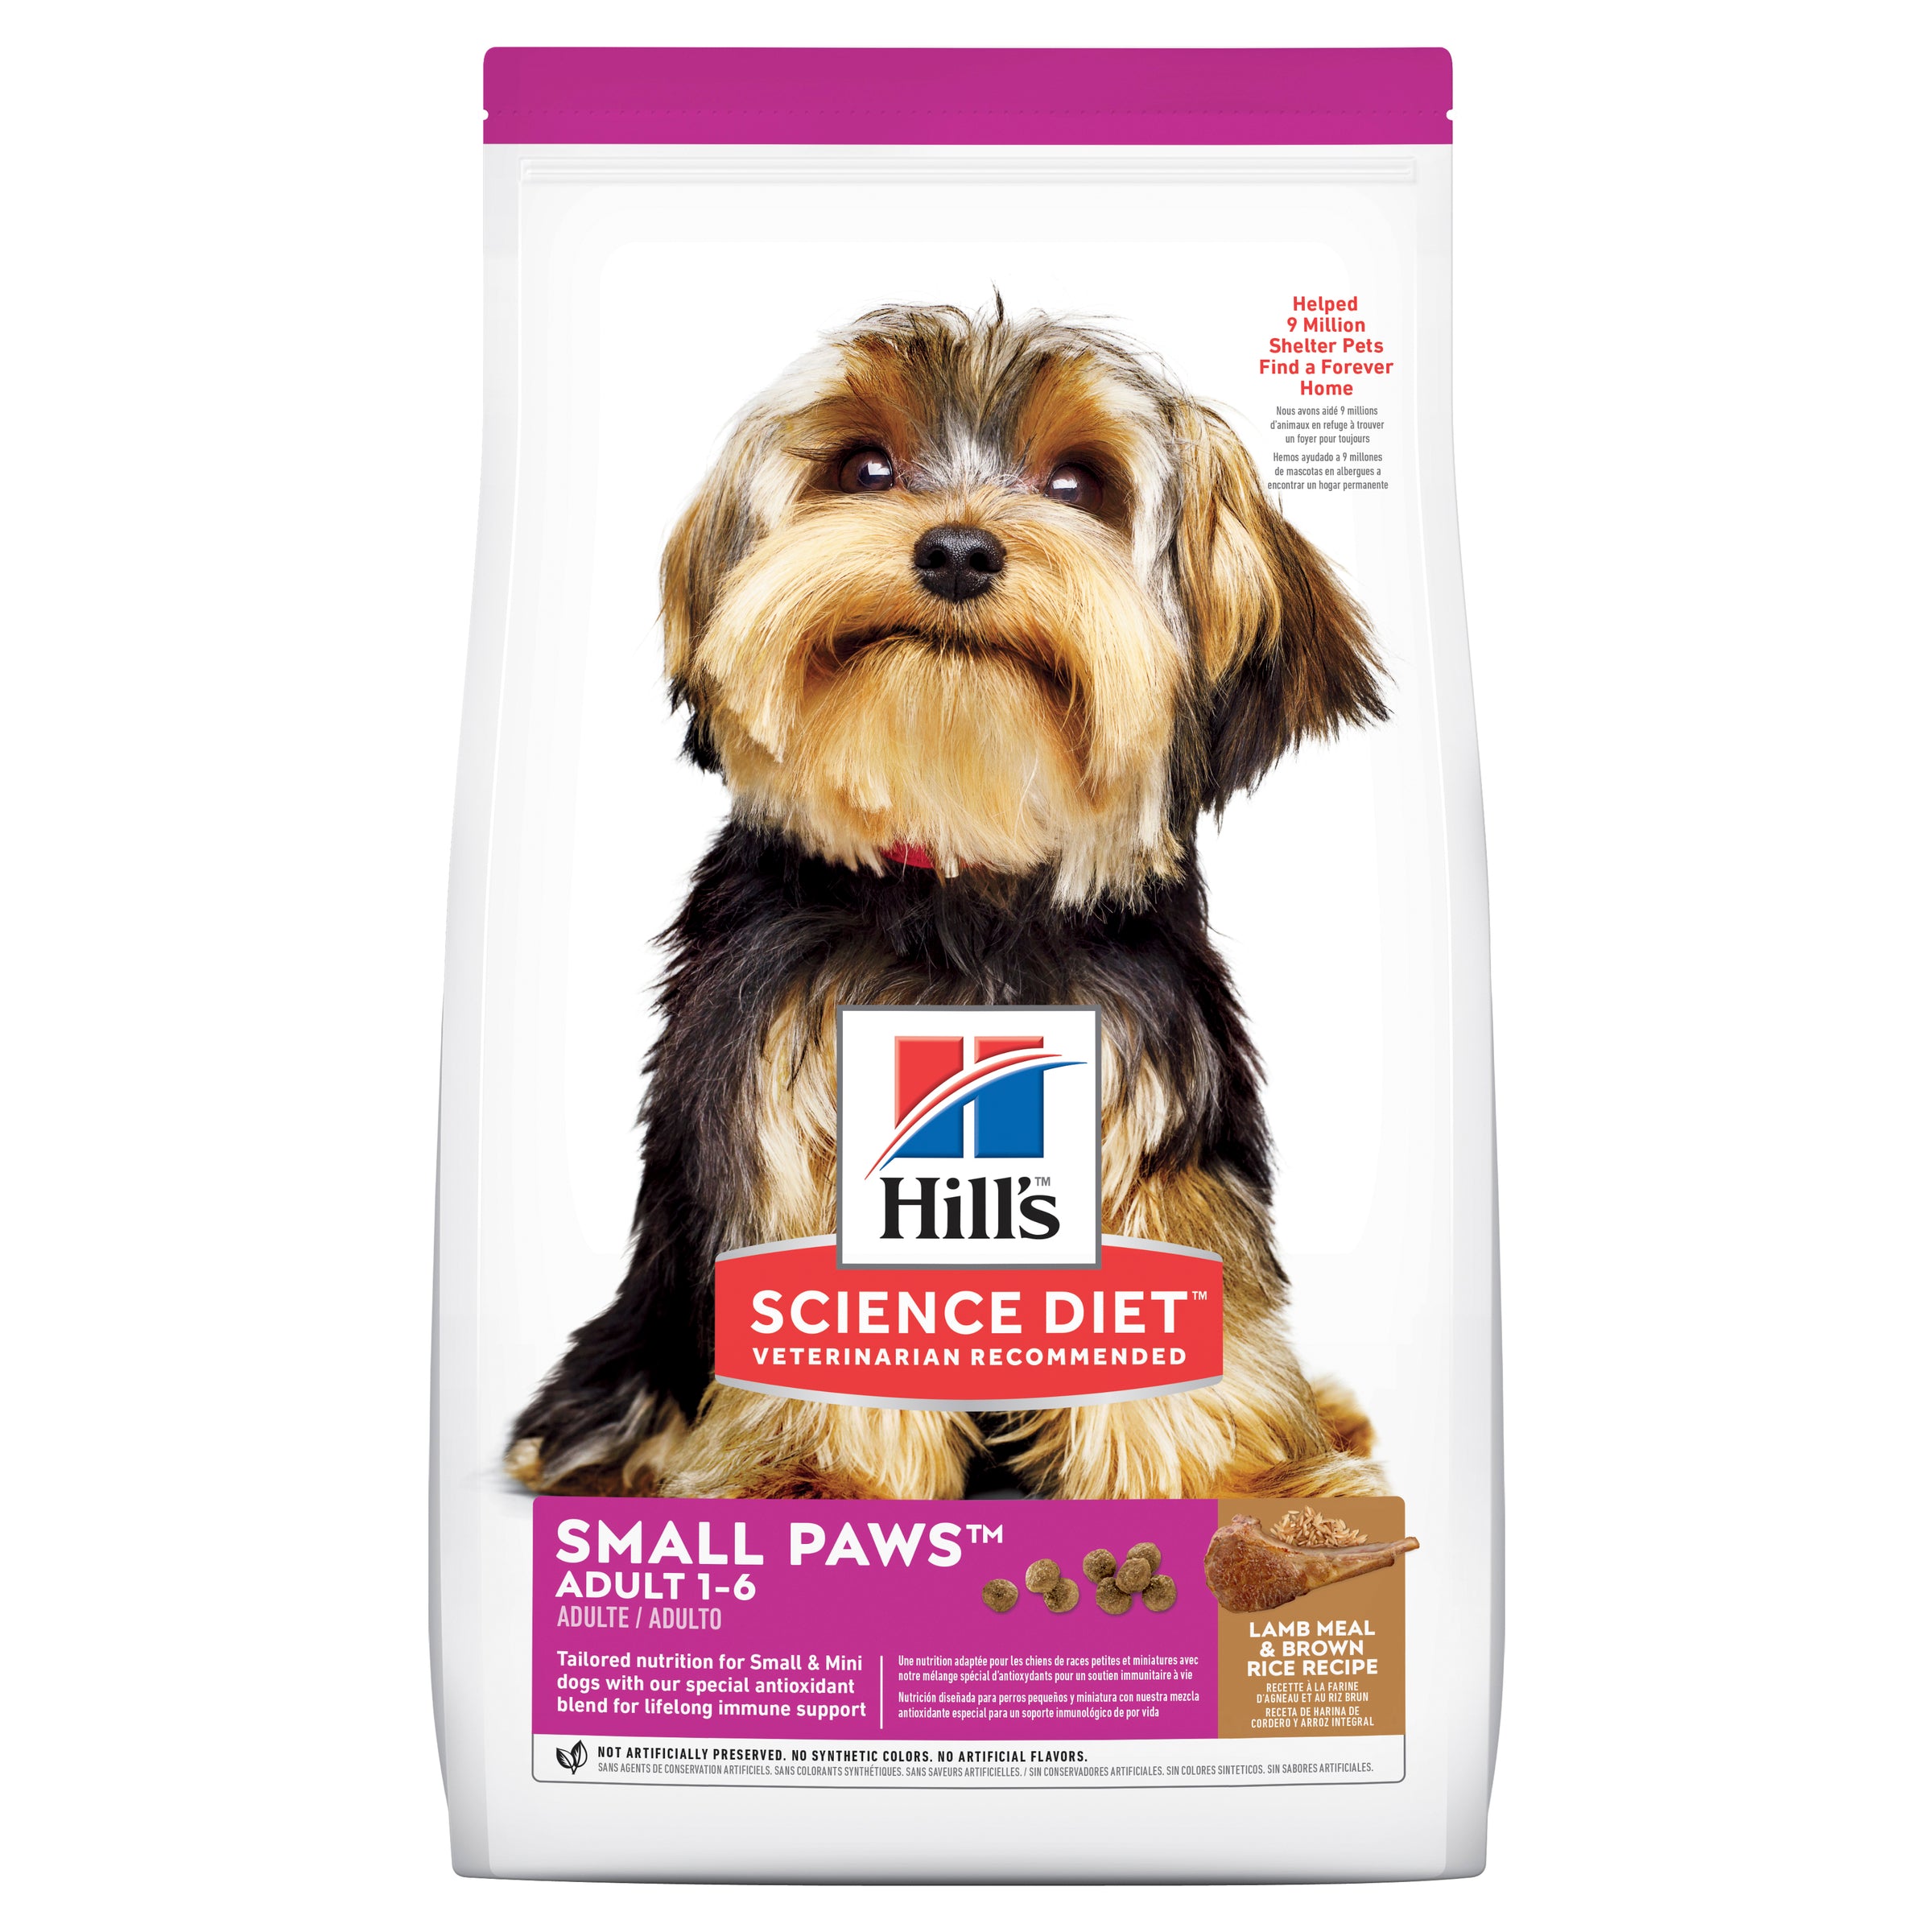 Hills Science Diet Small Paws Adult 1-6 Chicken 1.5-7.03kg